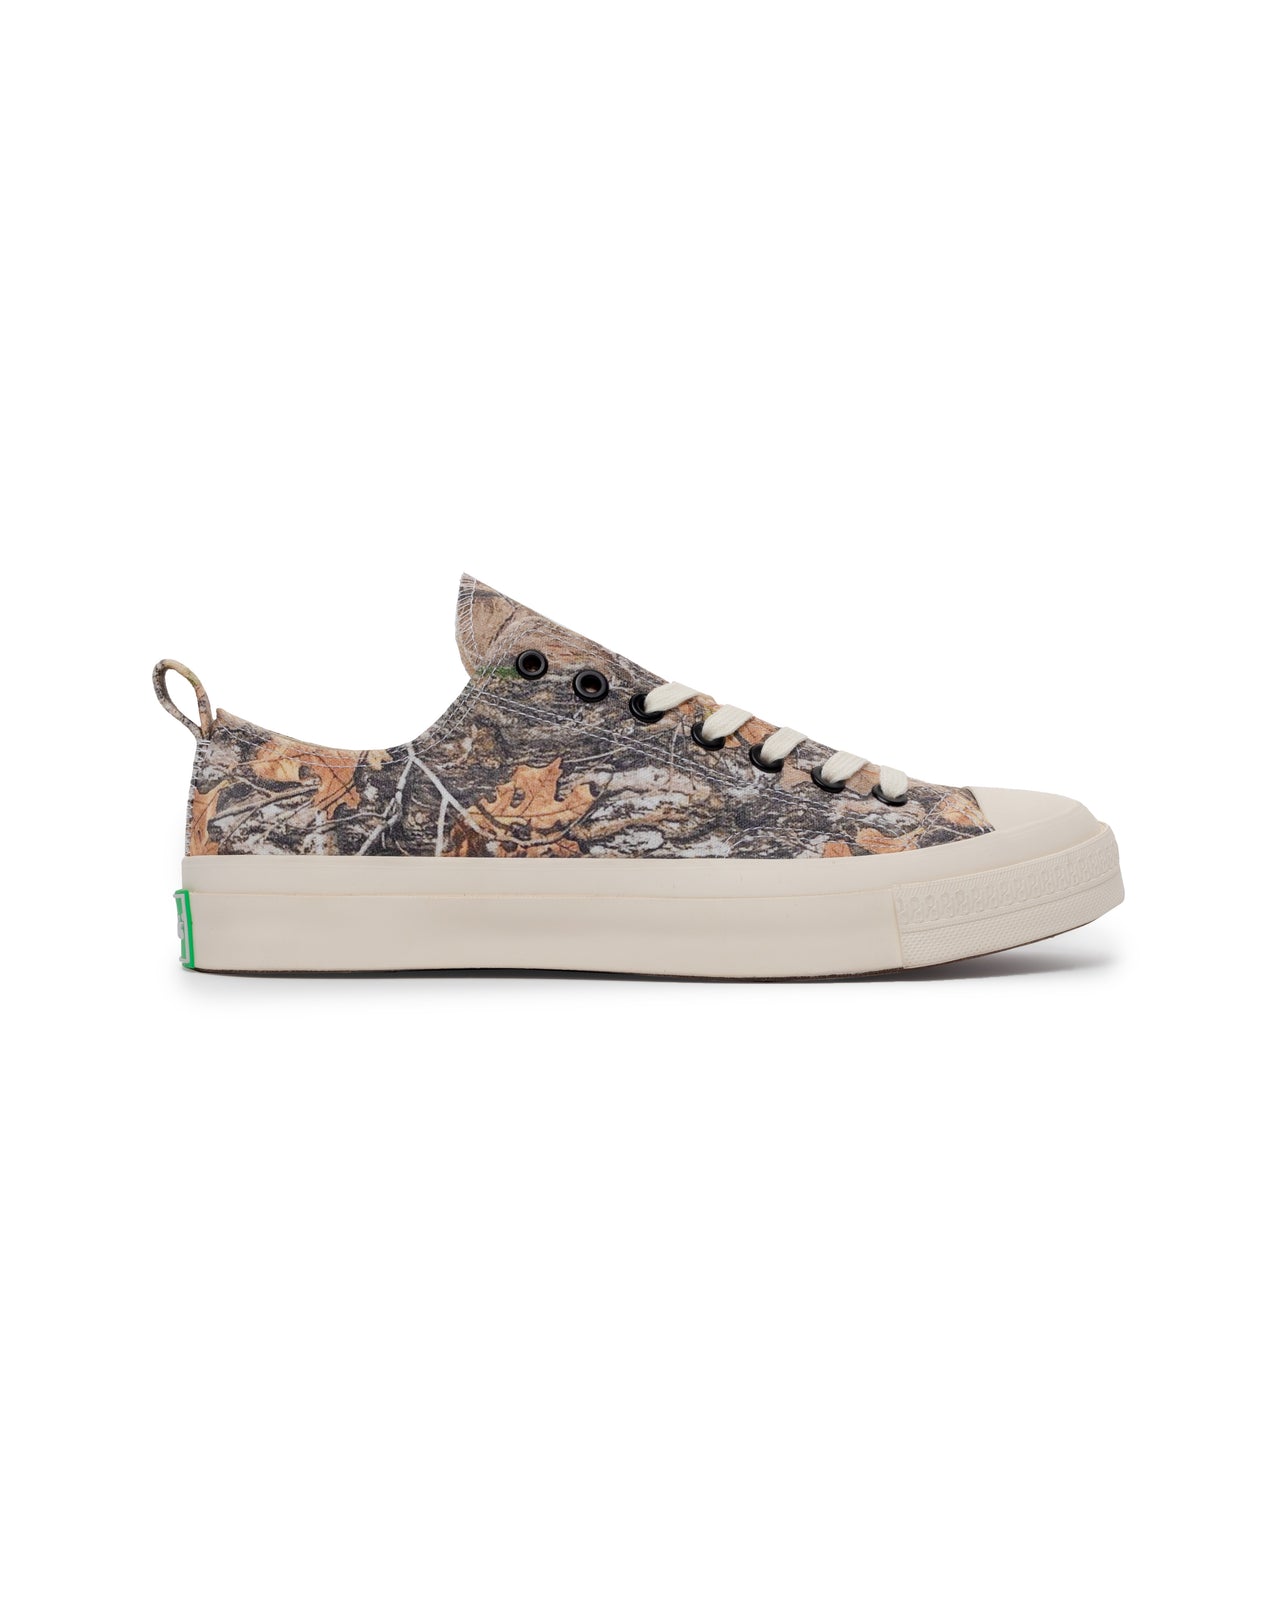 LUCKY ONE "CAMOUFLAGE" LOW